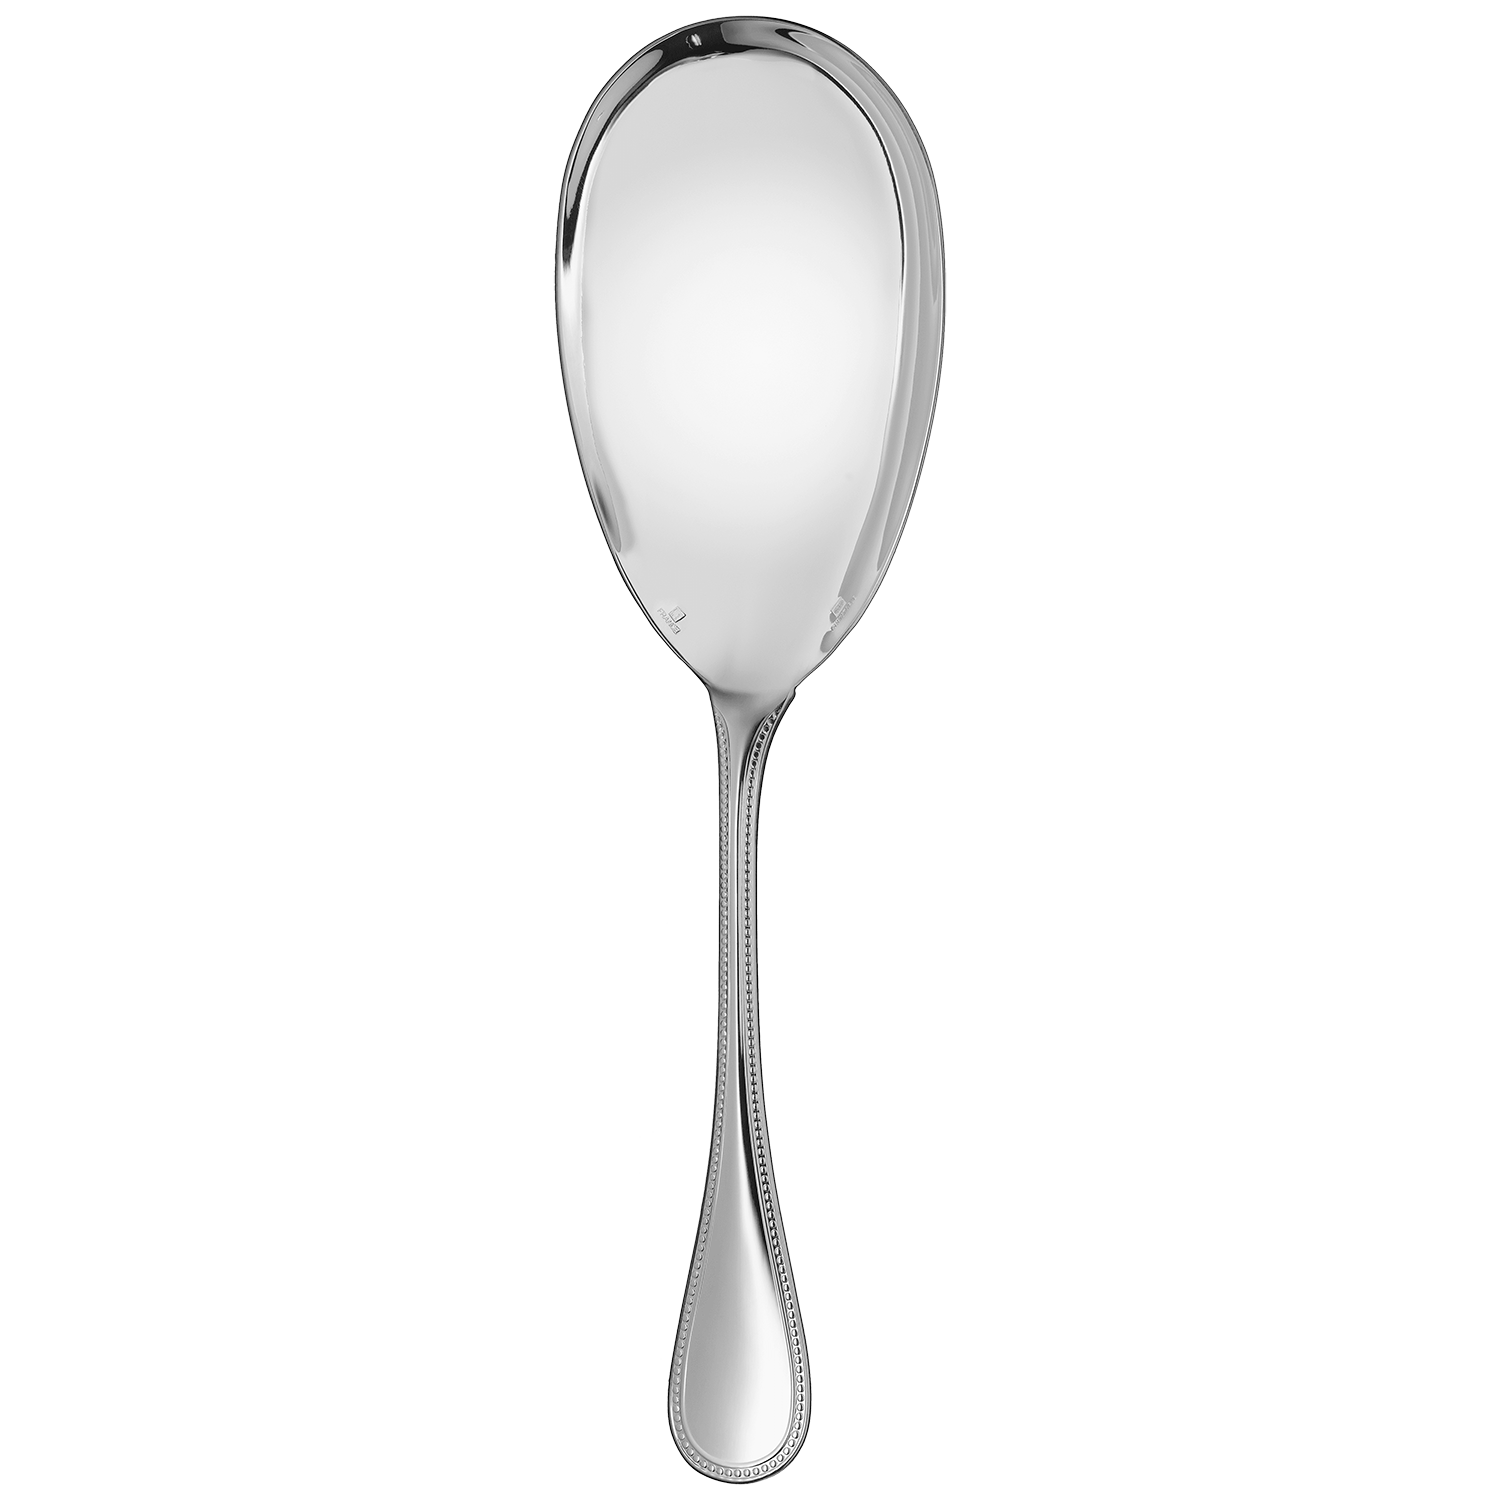 Silver-Plated serving ladle